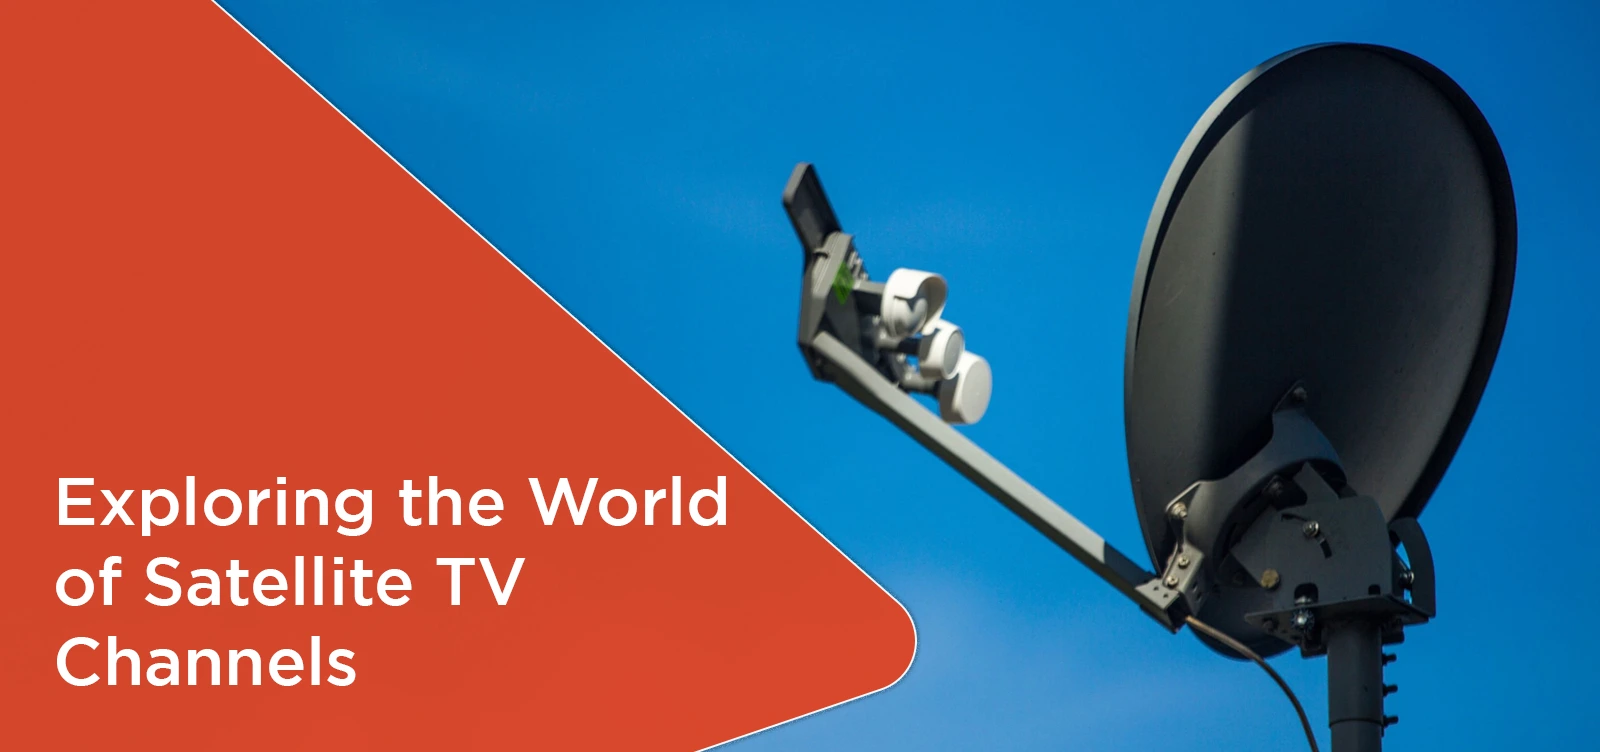 Exploring the World of Satellite TV Channels